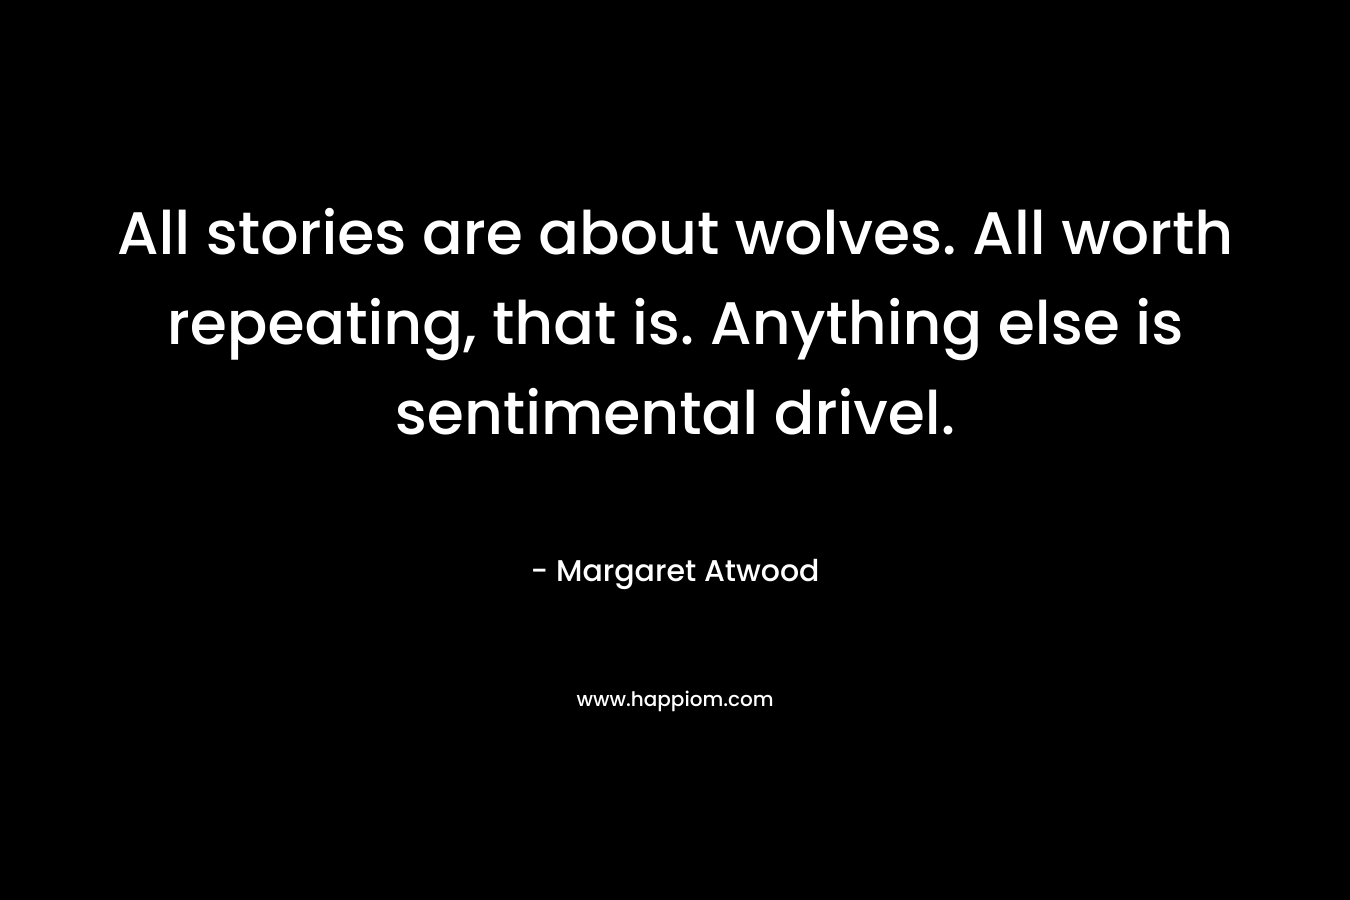 All stories are about wolves. All worth repeating, that is. Anything else is sentimental drivel. – Margaret Atwood